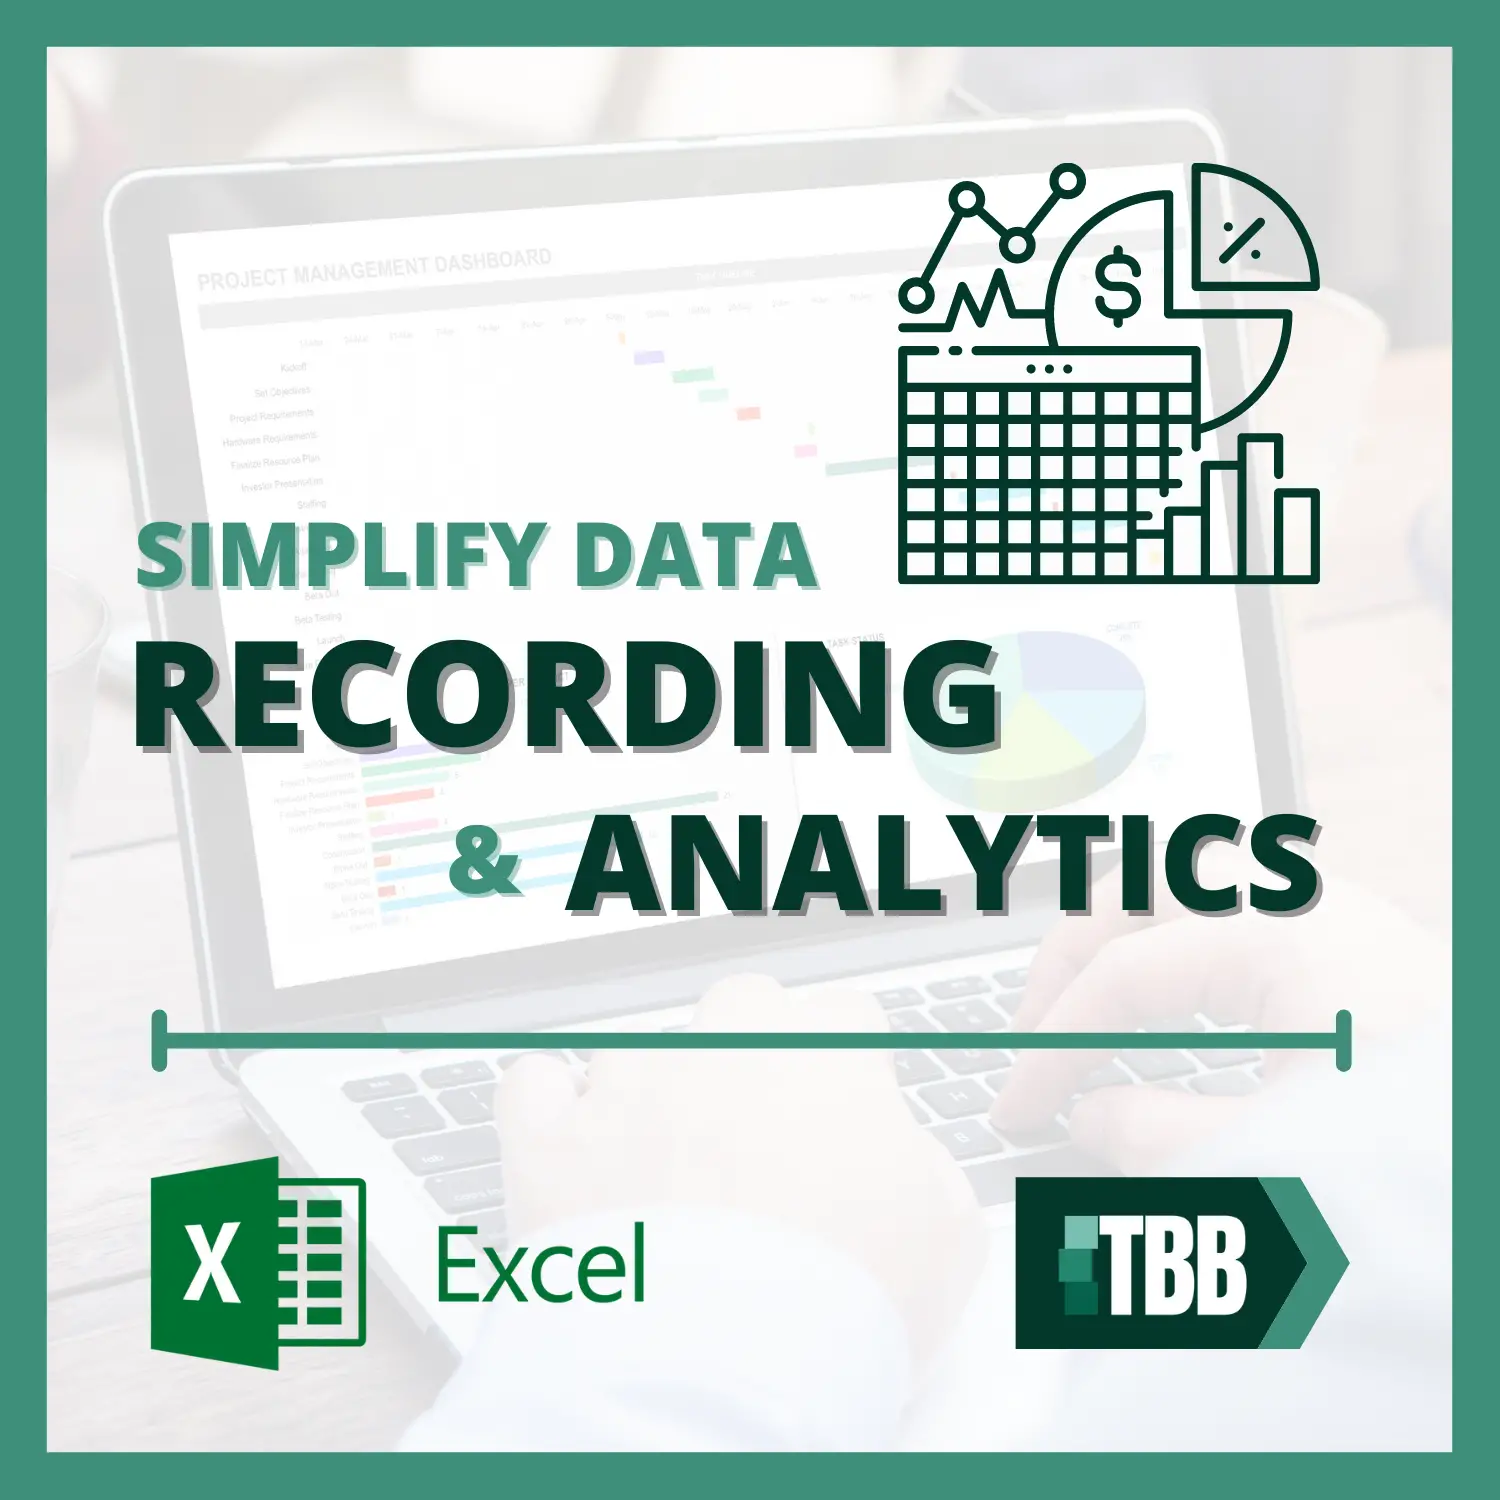 Excel: The Electronic Spreadsheet For All Your Business Needs